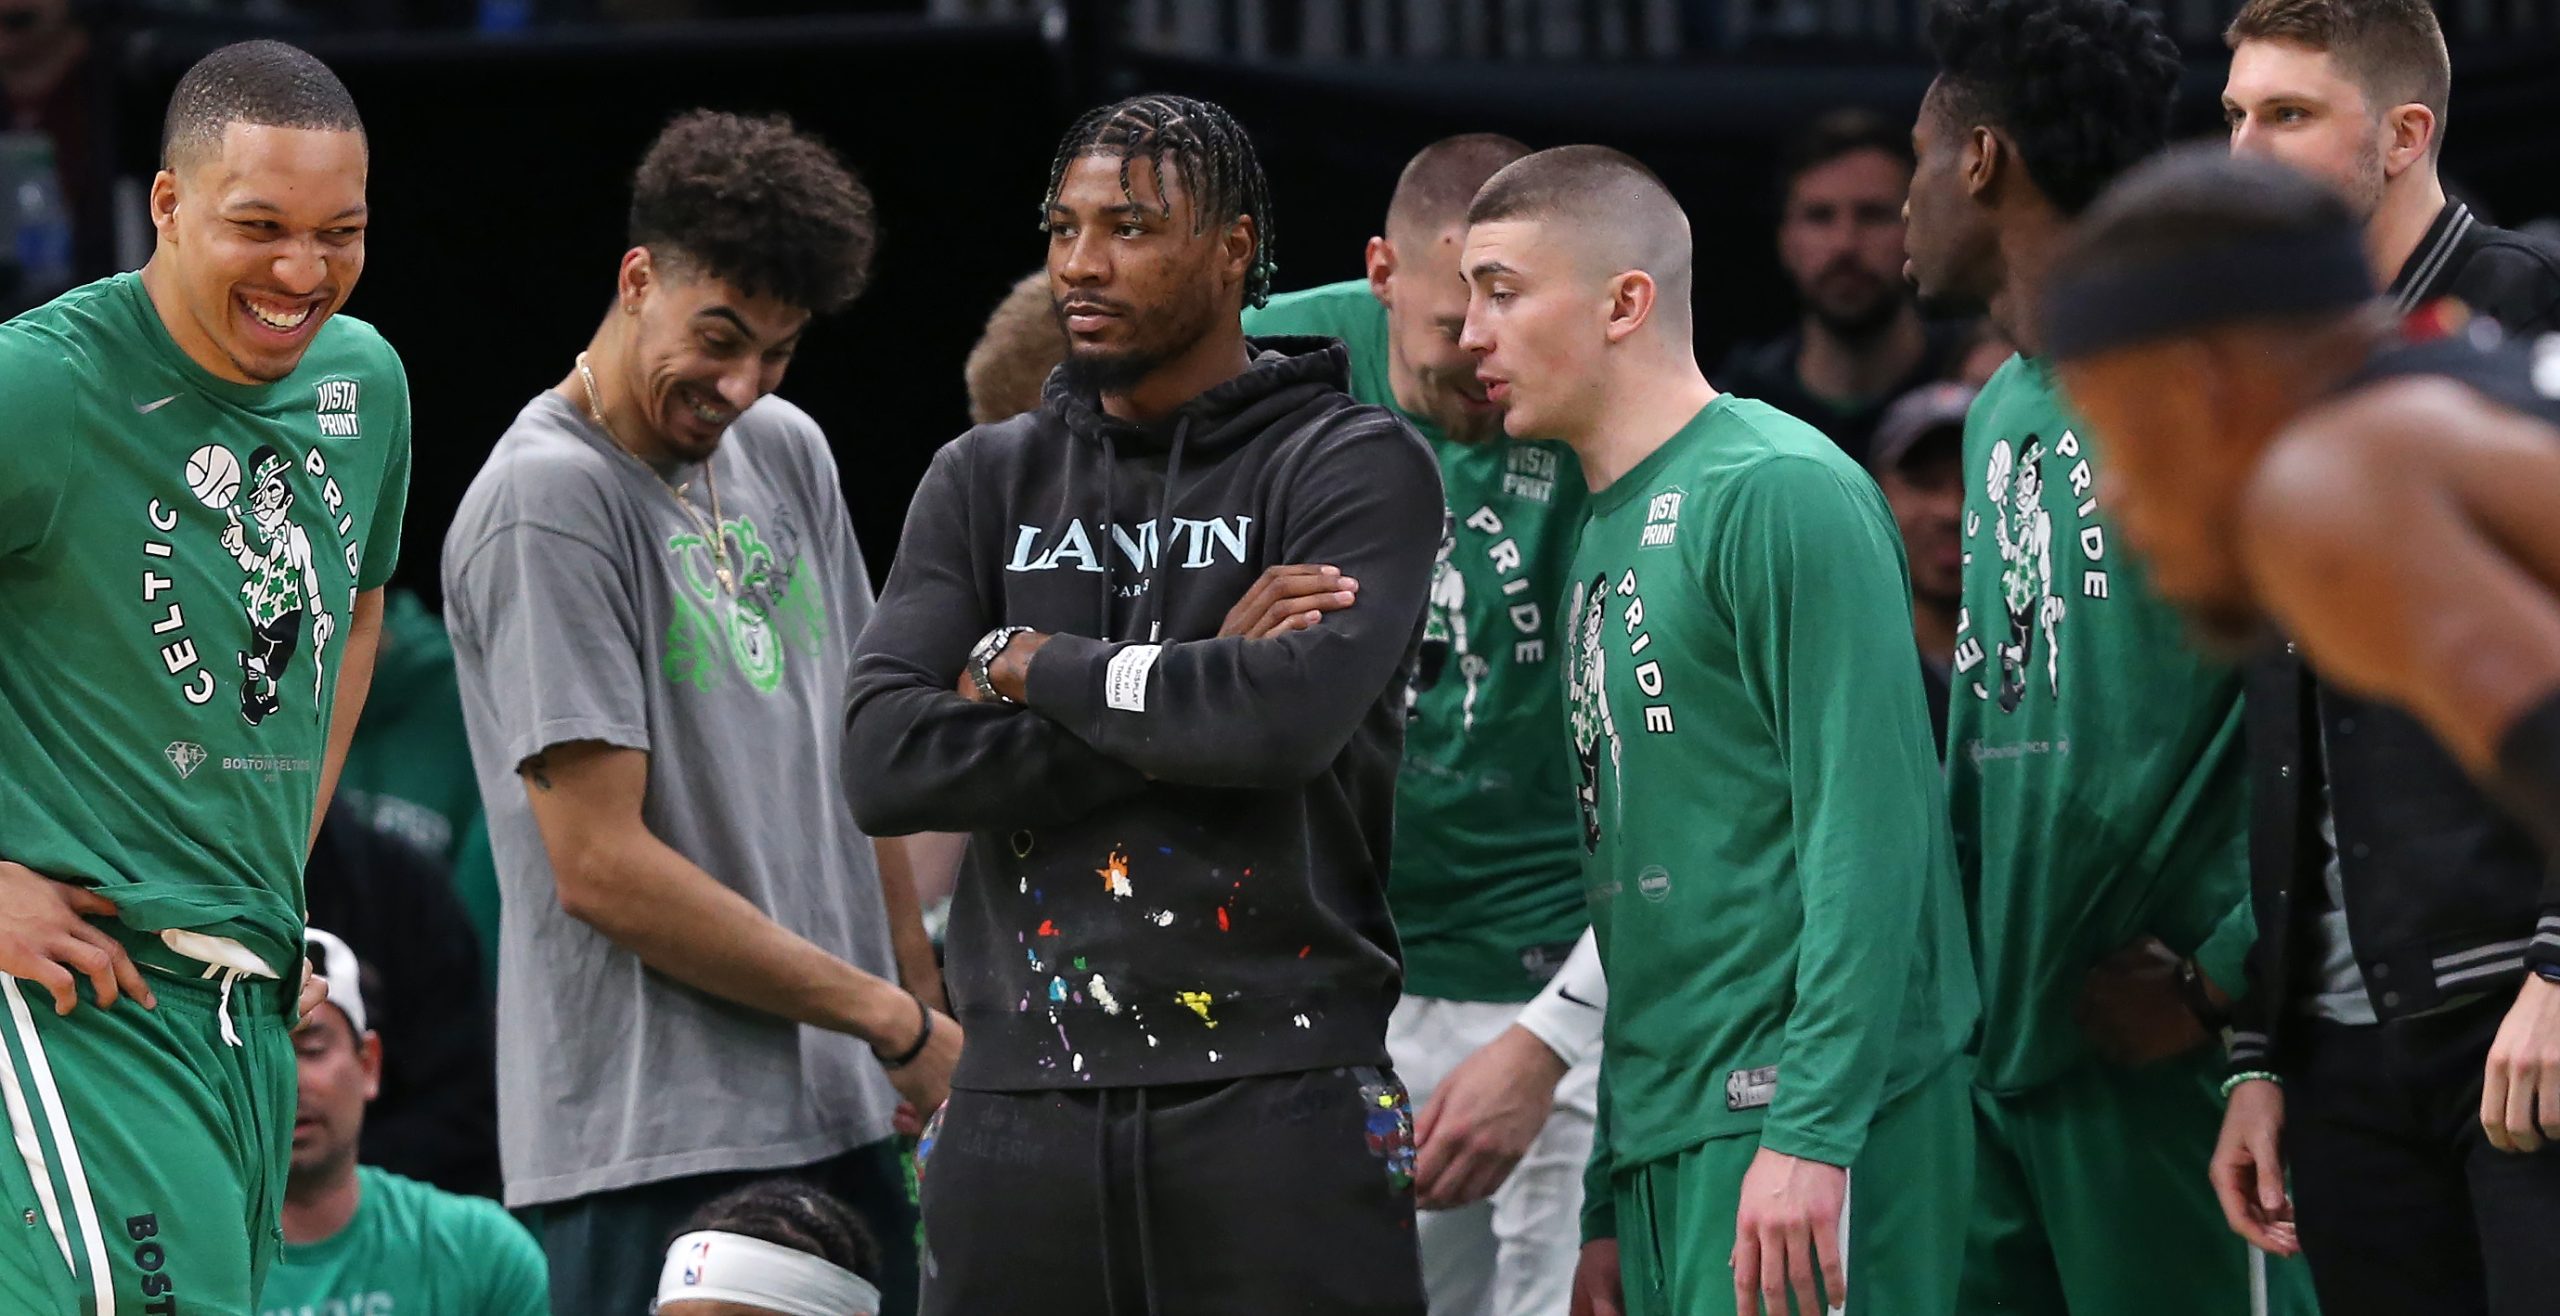 Marcus Smart is pictured in street clothes on the sideline in the first quarter as the Boston Celtics hosted the Miami Heat.